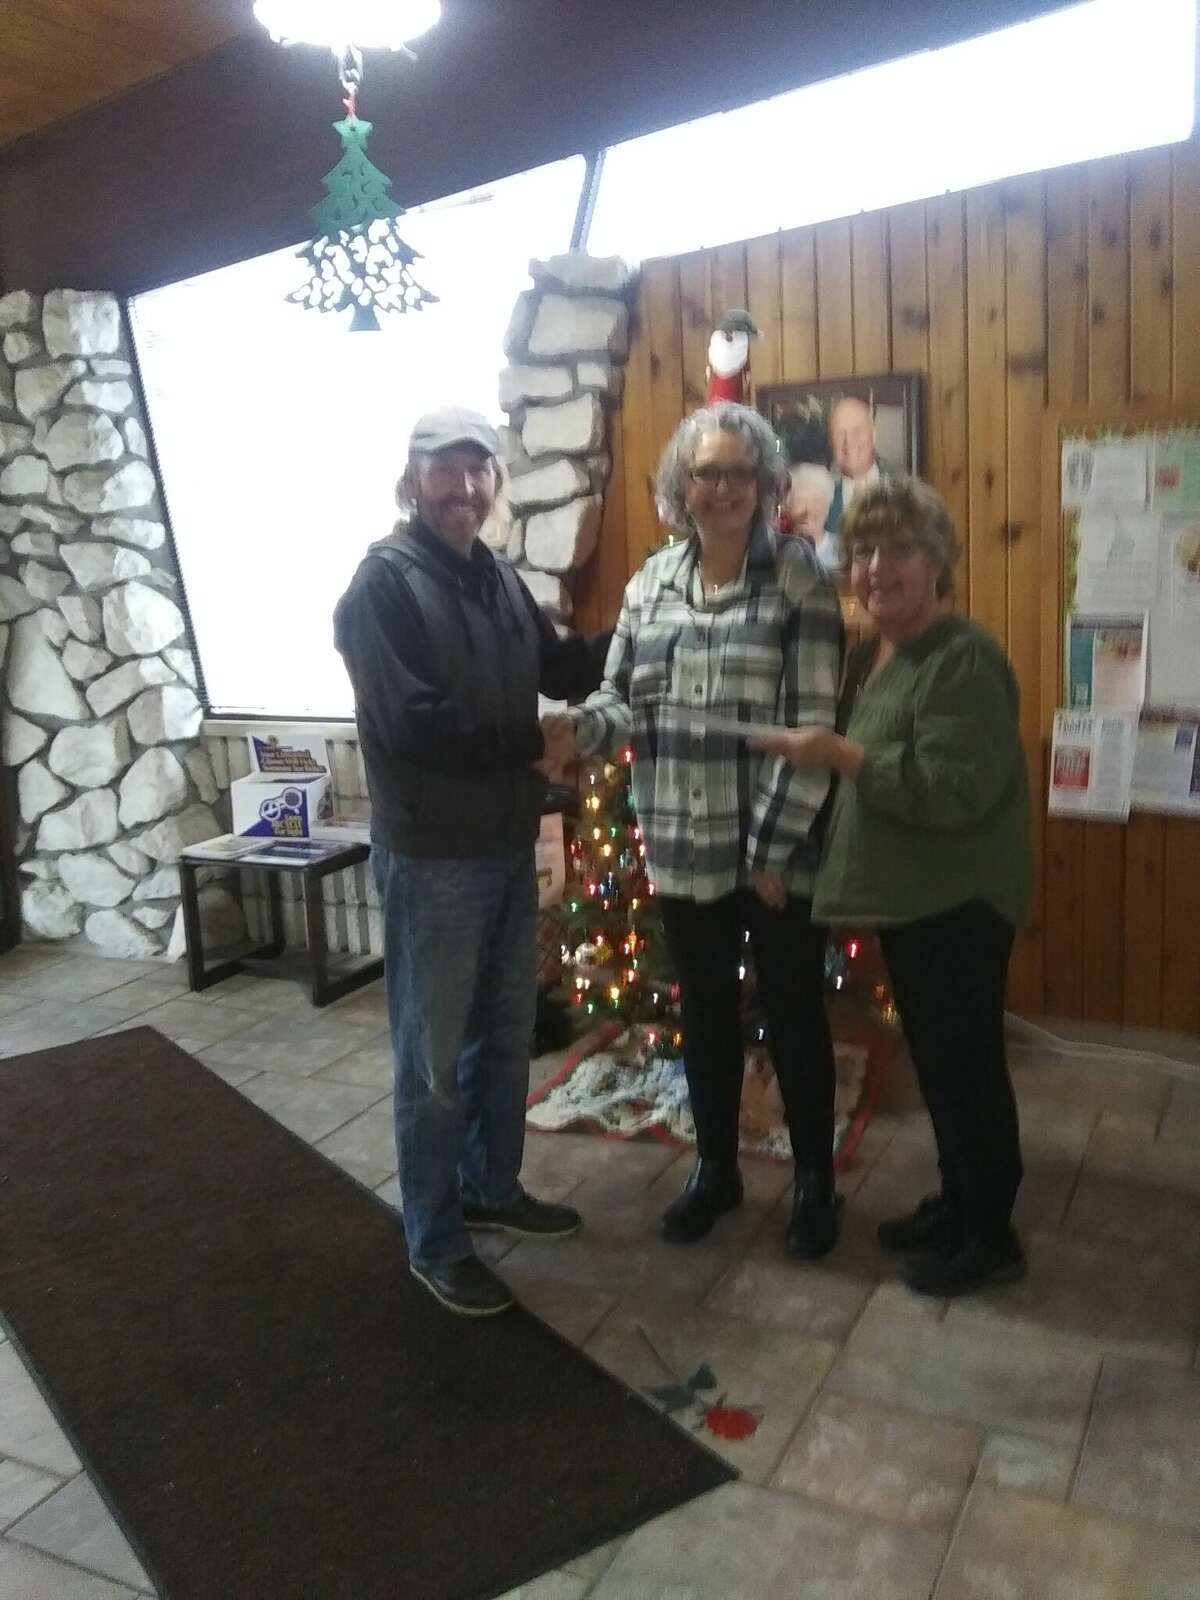  Rick Tetsworth, Filer Credit Union Board of Directors, presents $500 to the Wagoner Center. Shown accepting the check are Jeanne Barber and Netters Cooper. 